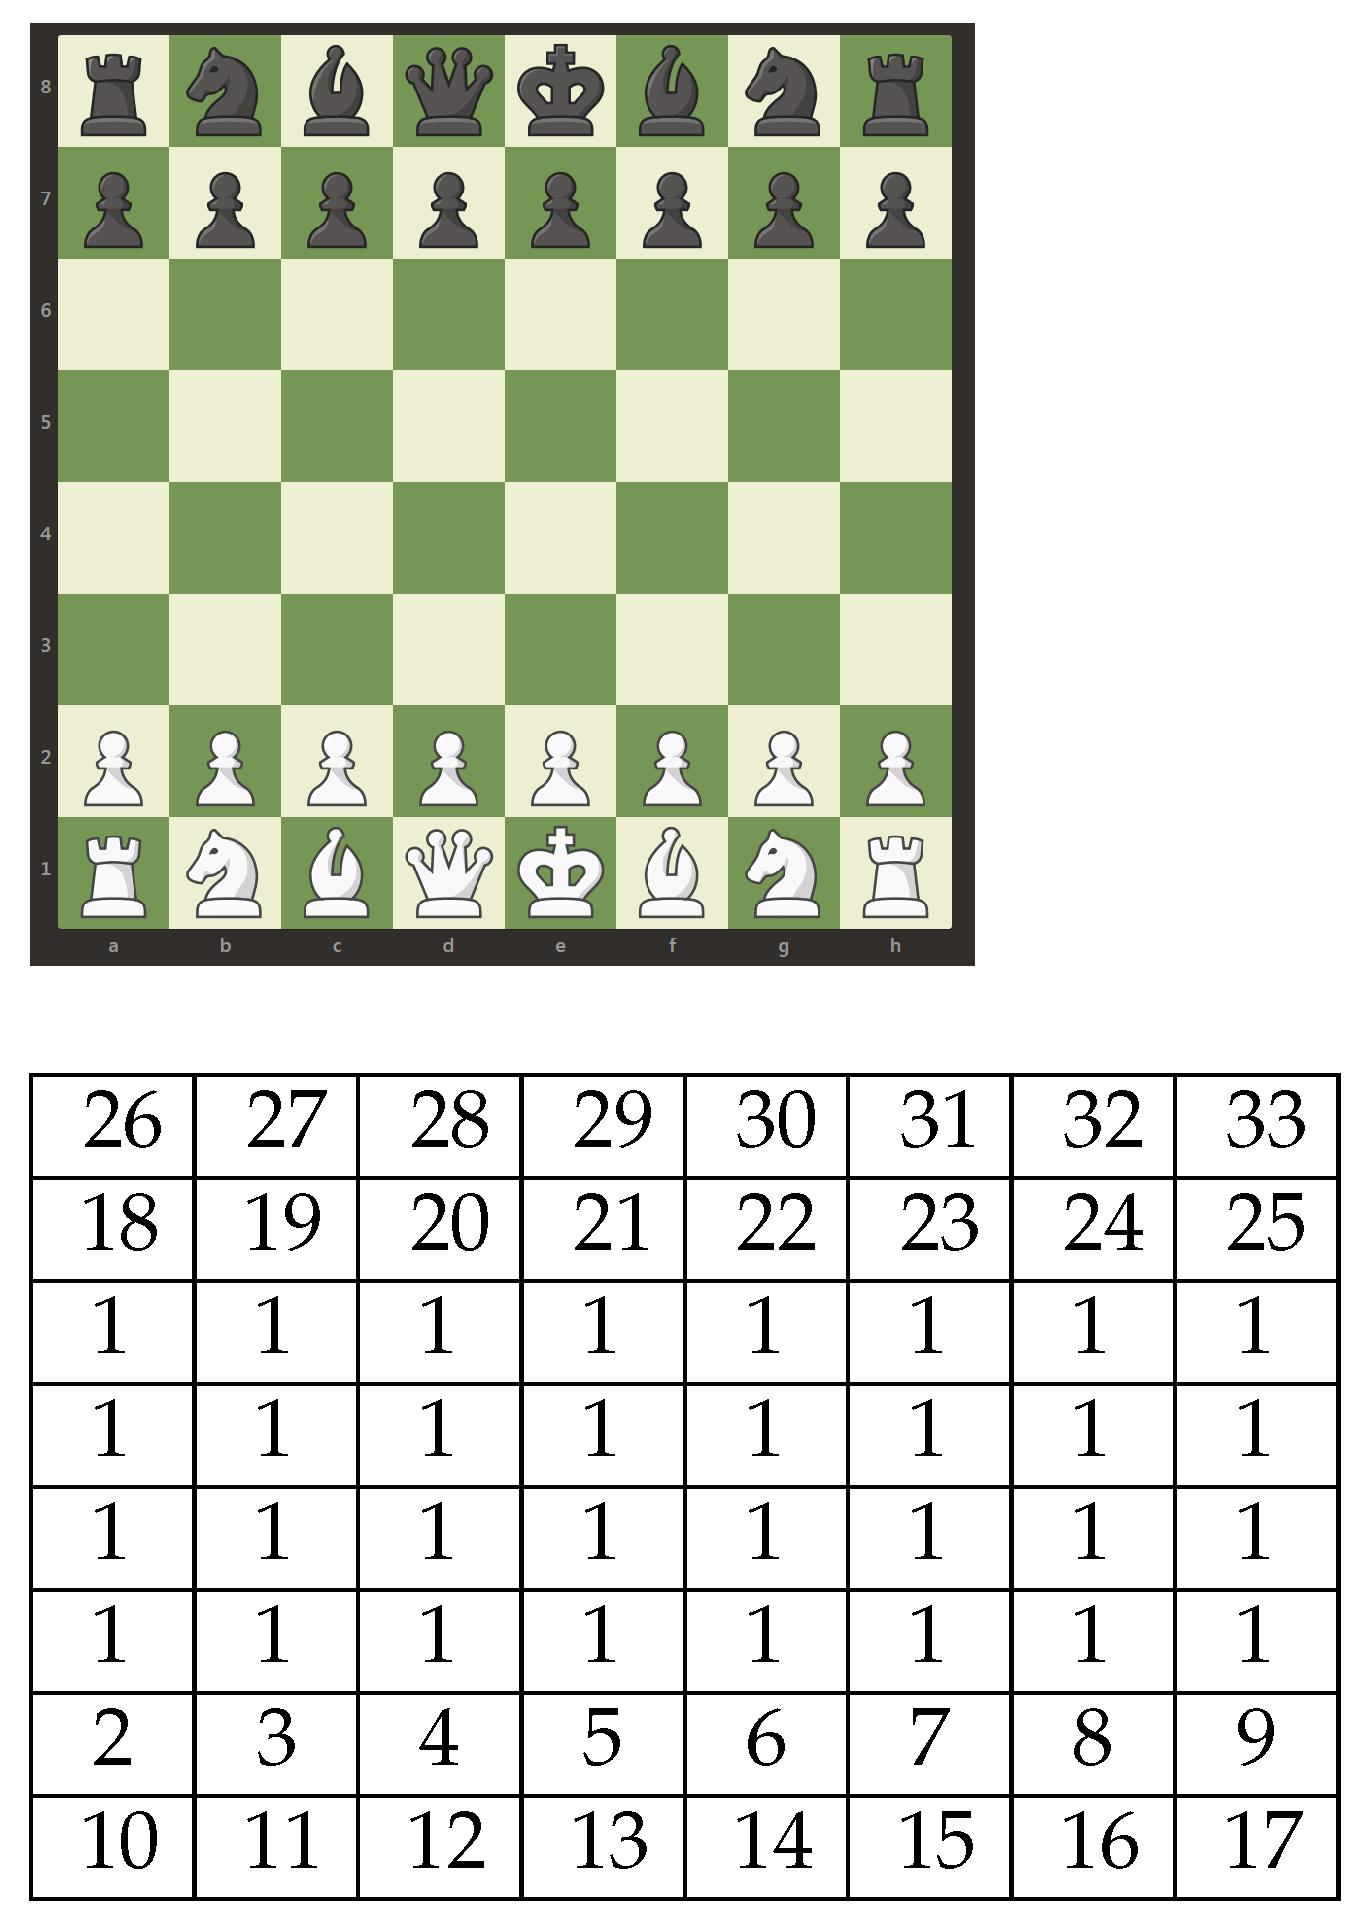 The 69 position, could you do it? - Chess Forums 